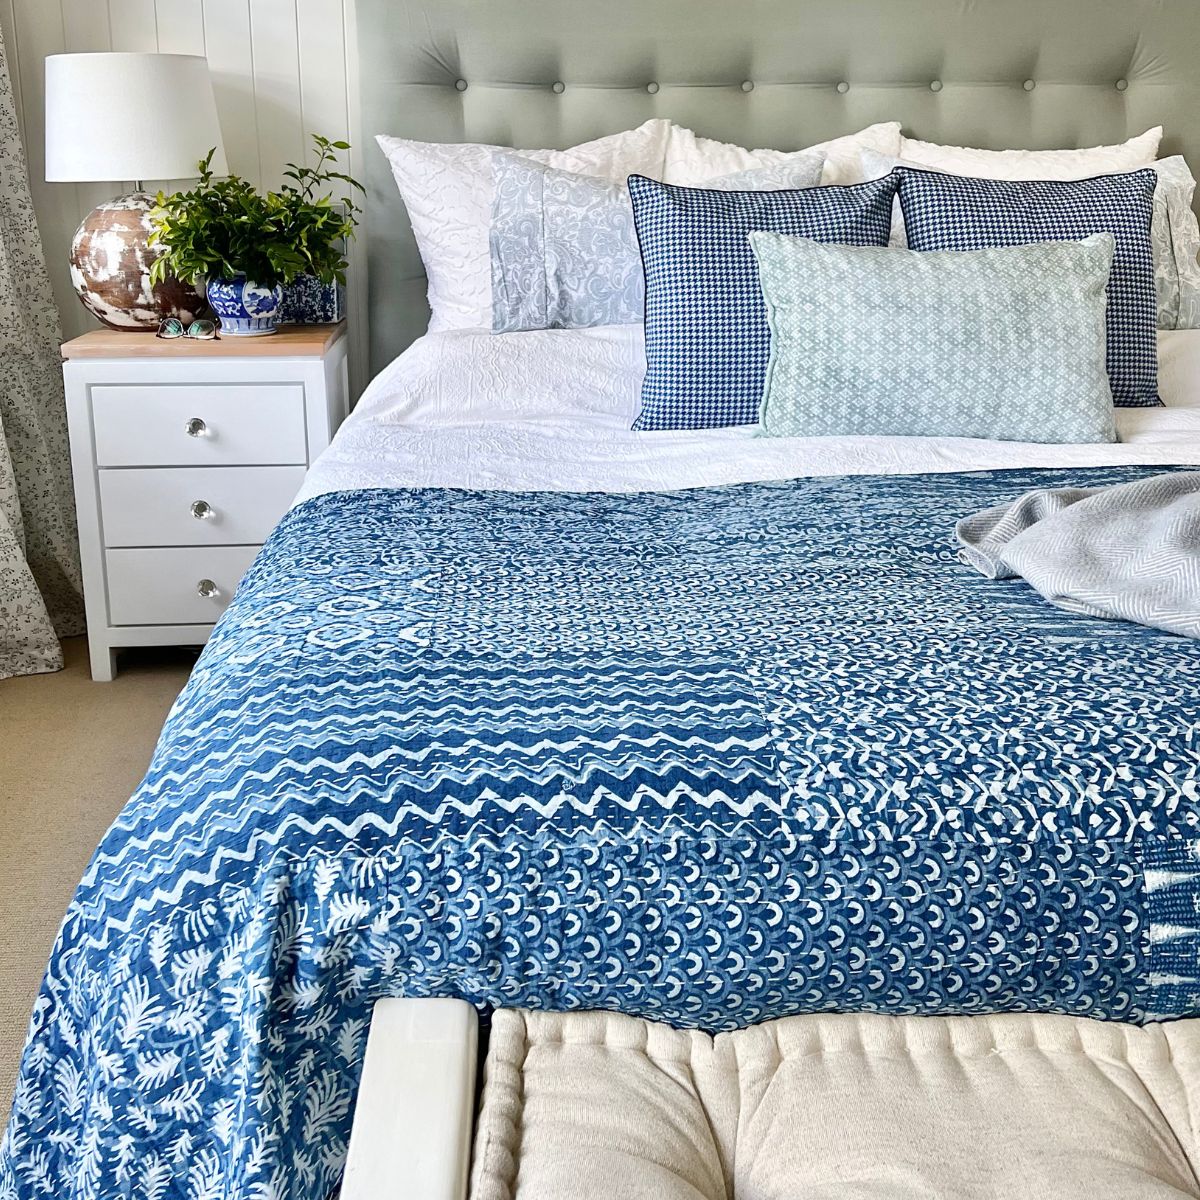 Patchwork Kantha quilt / bedspread - Blue and white- Queen